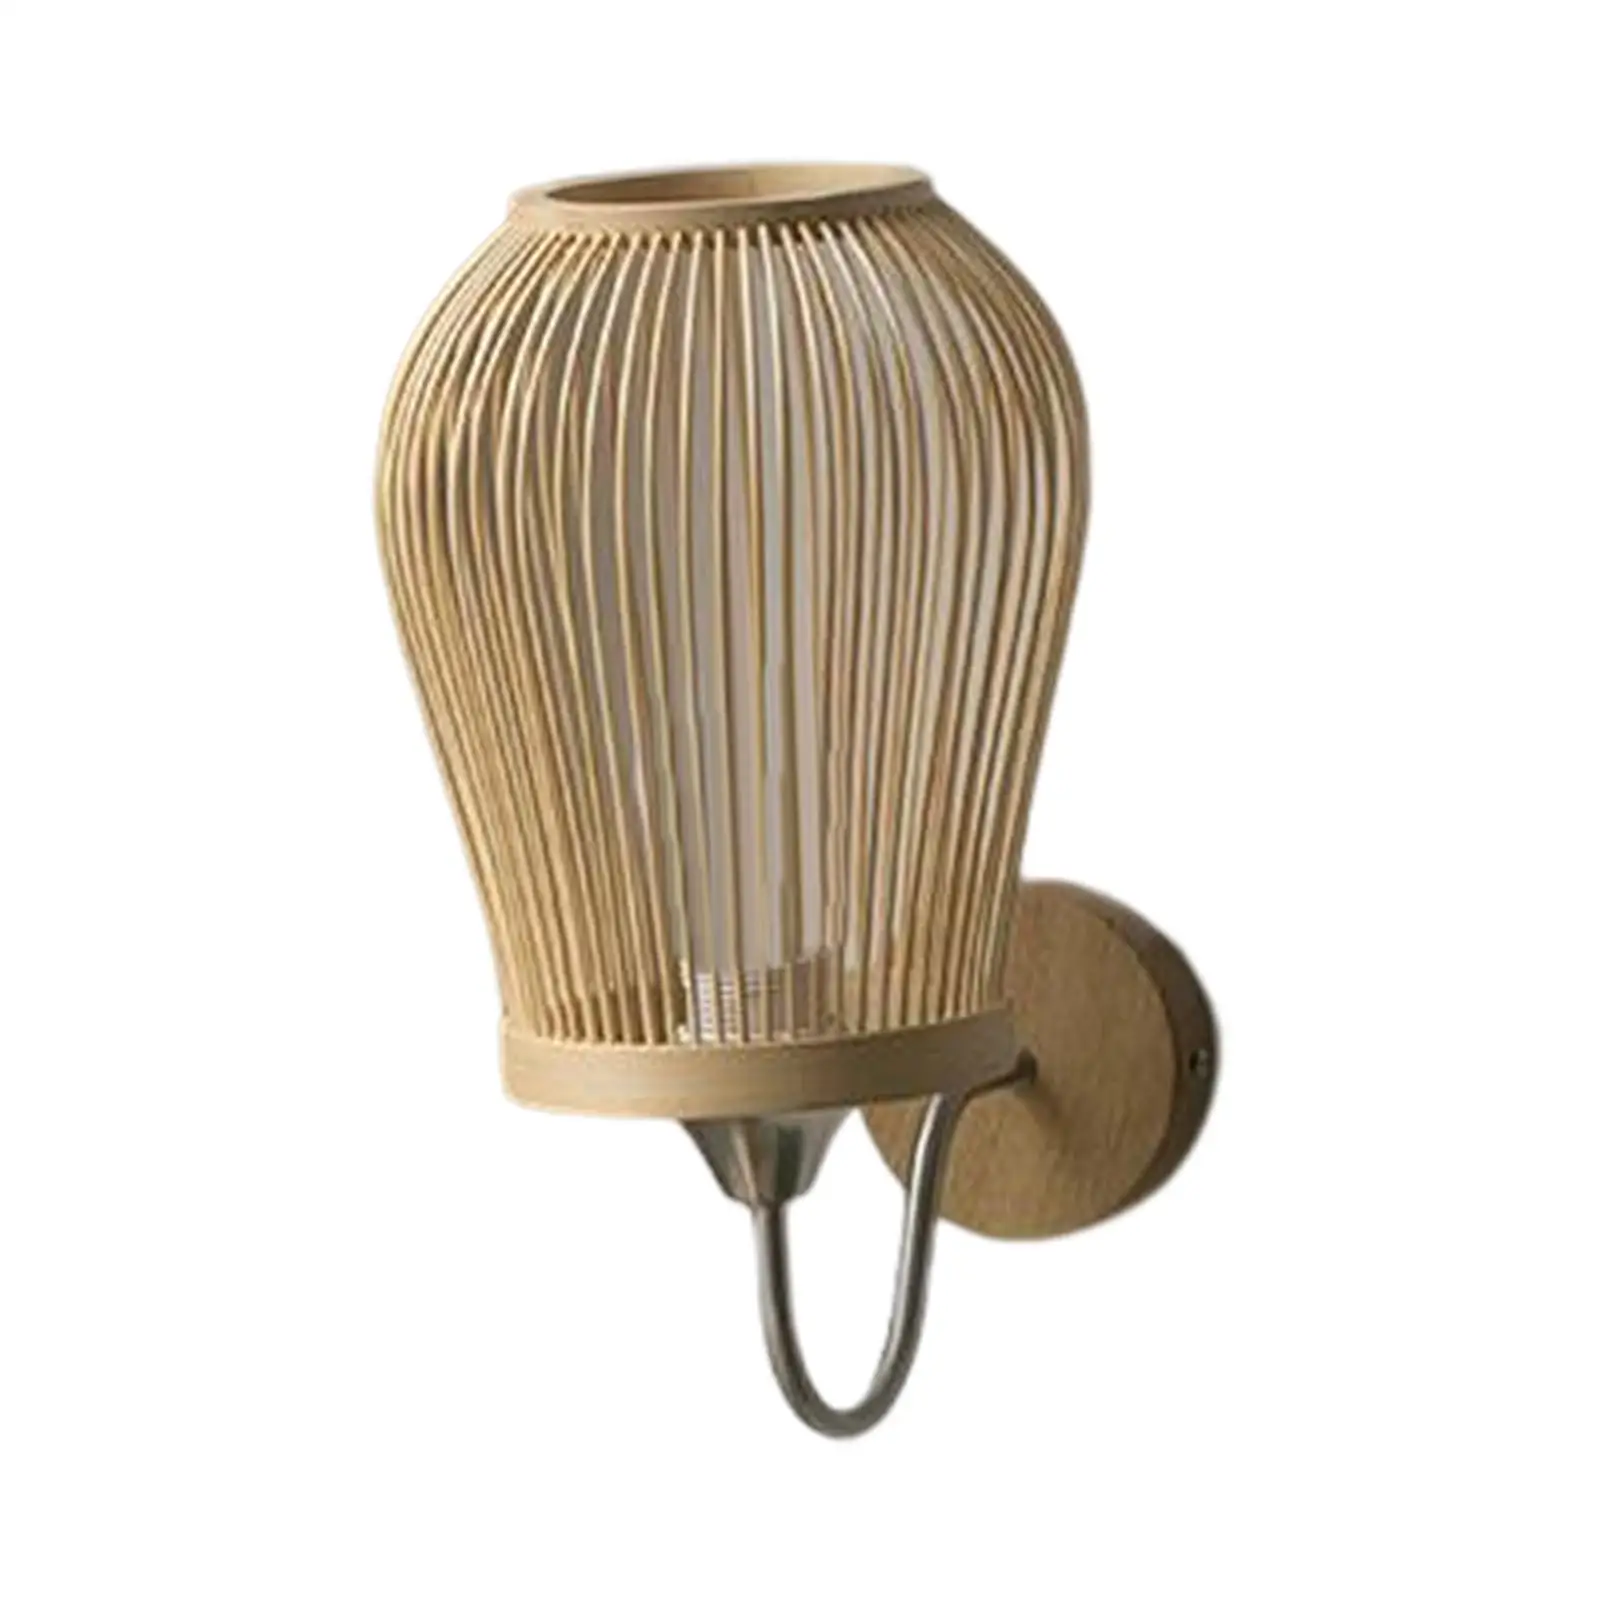 Bamboo Wall Mount Sconce Lamp Light Retro Style E27 Base Farmhouse Lighting for Indoor Living Room Home Decoration